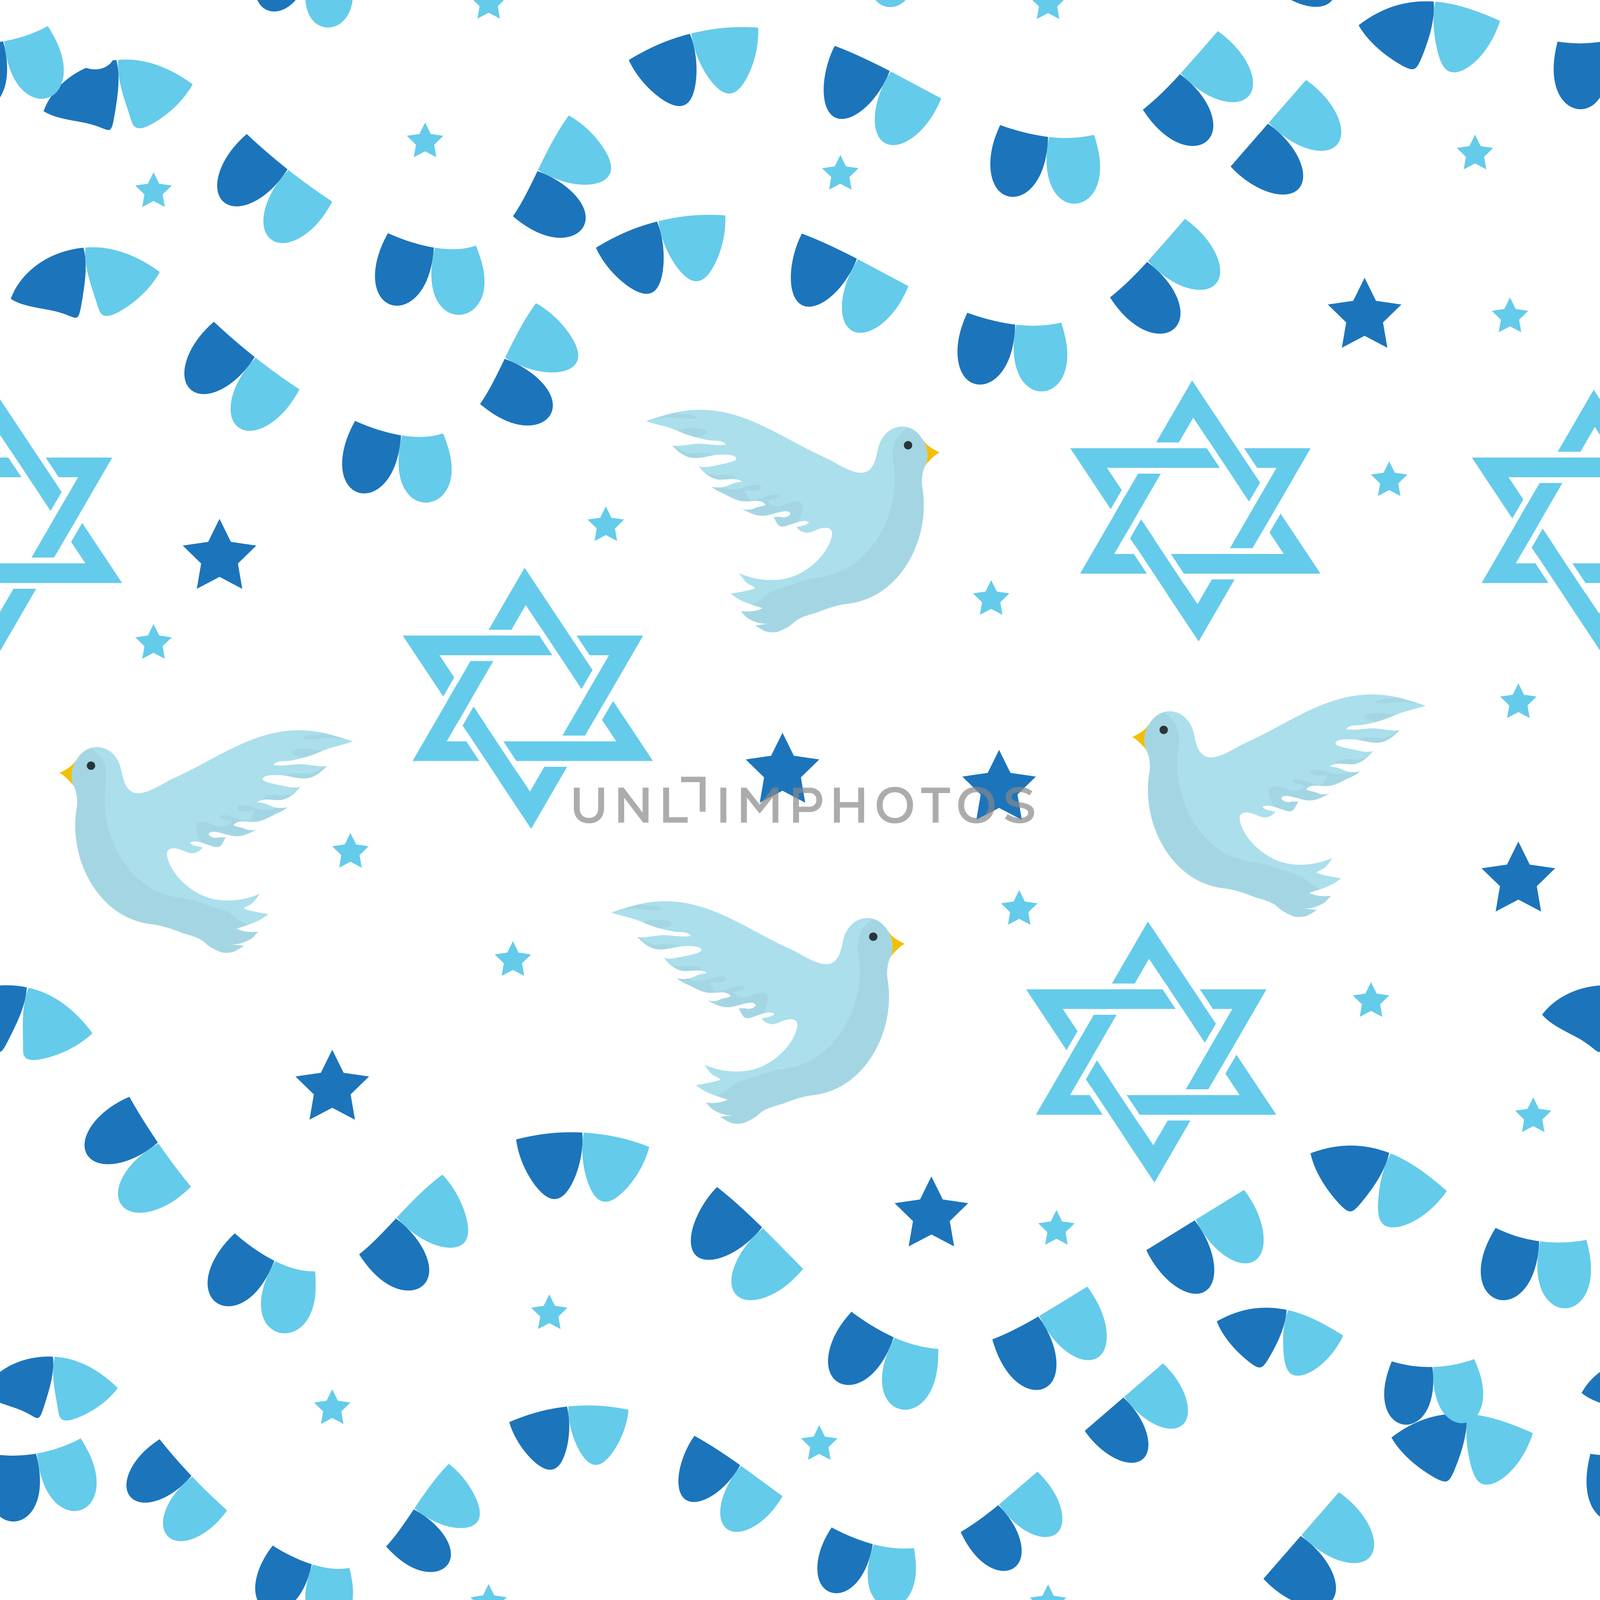 Happy Israel Independence Day seamless pattern with flags and bunting. Jewish Holidays endless background, texture. Jewish backdrop. illustration. by lucia_fox